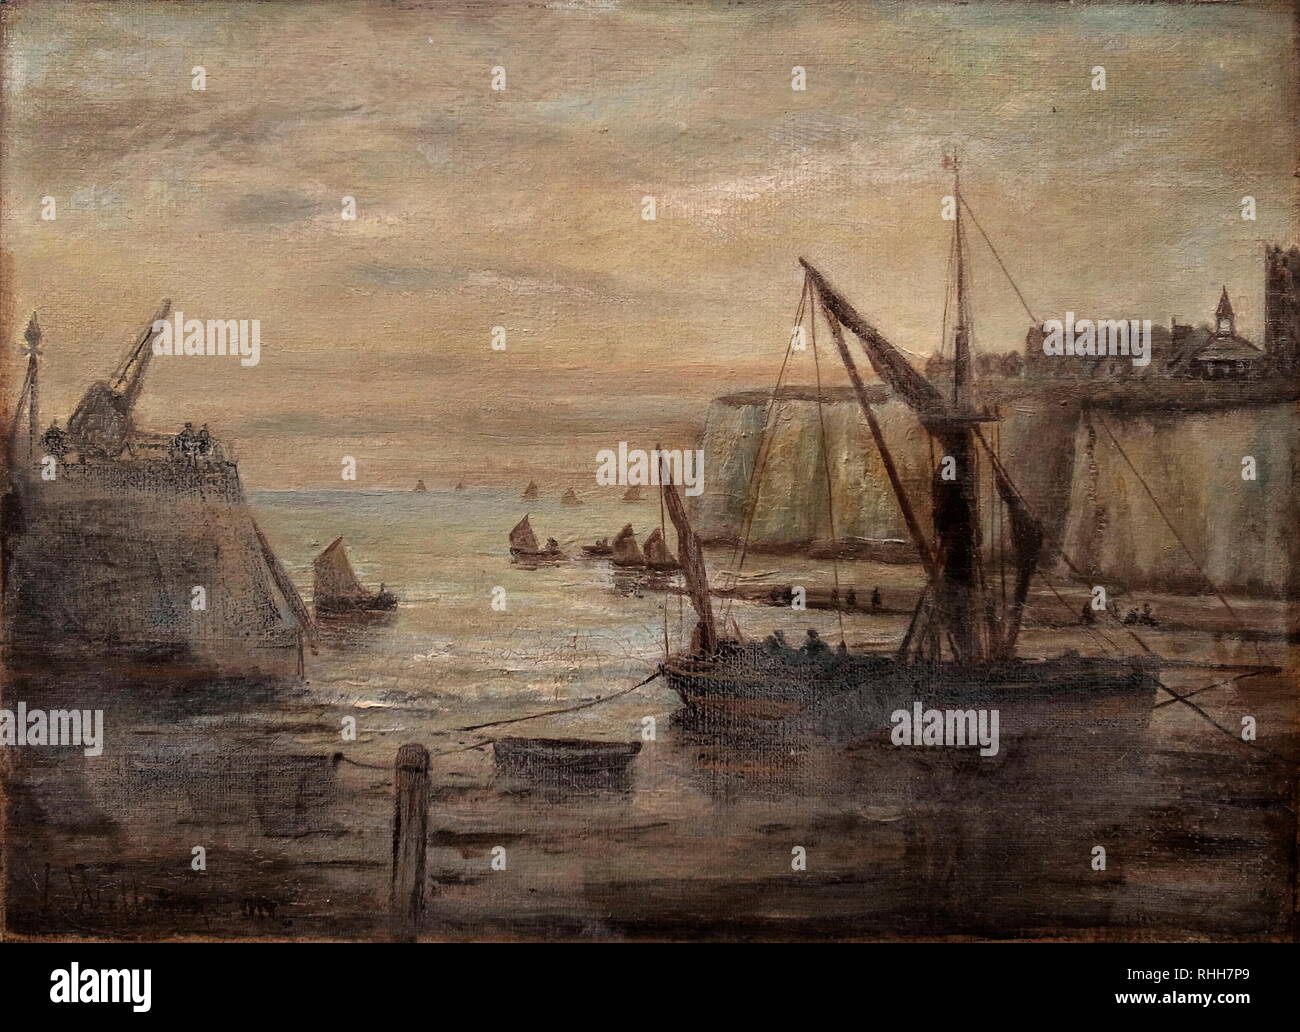 AJAXNETPHOTO. 2012. SOUTHAMPTON, ENGLAND. - J. WILLIAMSON ART - VIEW OF BROADSTAIRS HARBOUR PAINTED BY J. WILLIAMSON. ENGLISH SCHOOL. INSCRIBED VERSO 'EVENING BROADSTAIRS HARBOUR.' EARLY 20TH CNTURY. SOURCE:PRIVATE COLLECTION. PHOTO:JONATHAN EASTLAND/AJAX REF:GR71319 Stock Photo